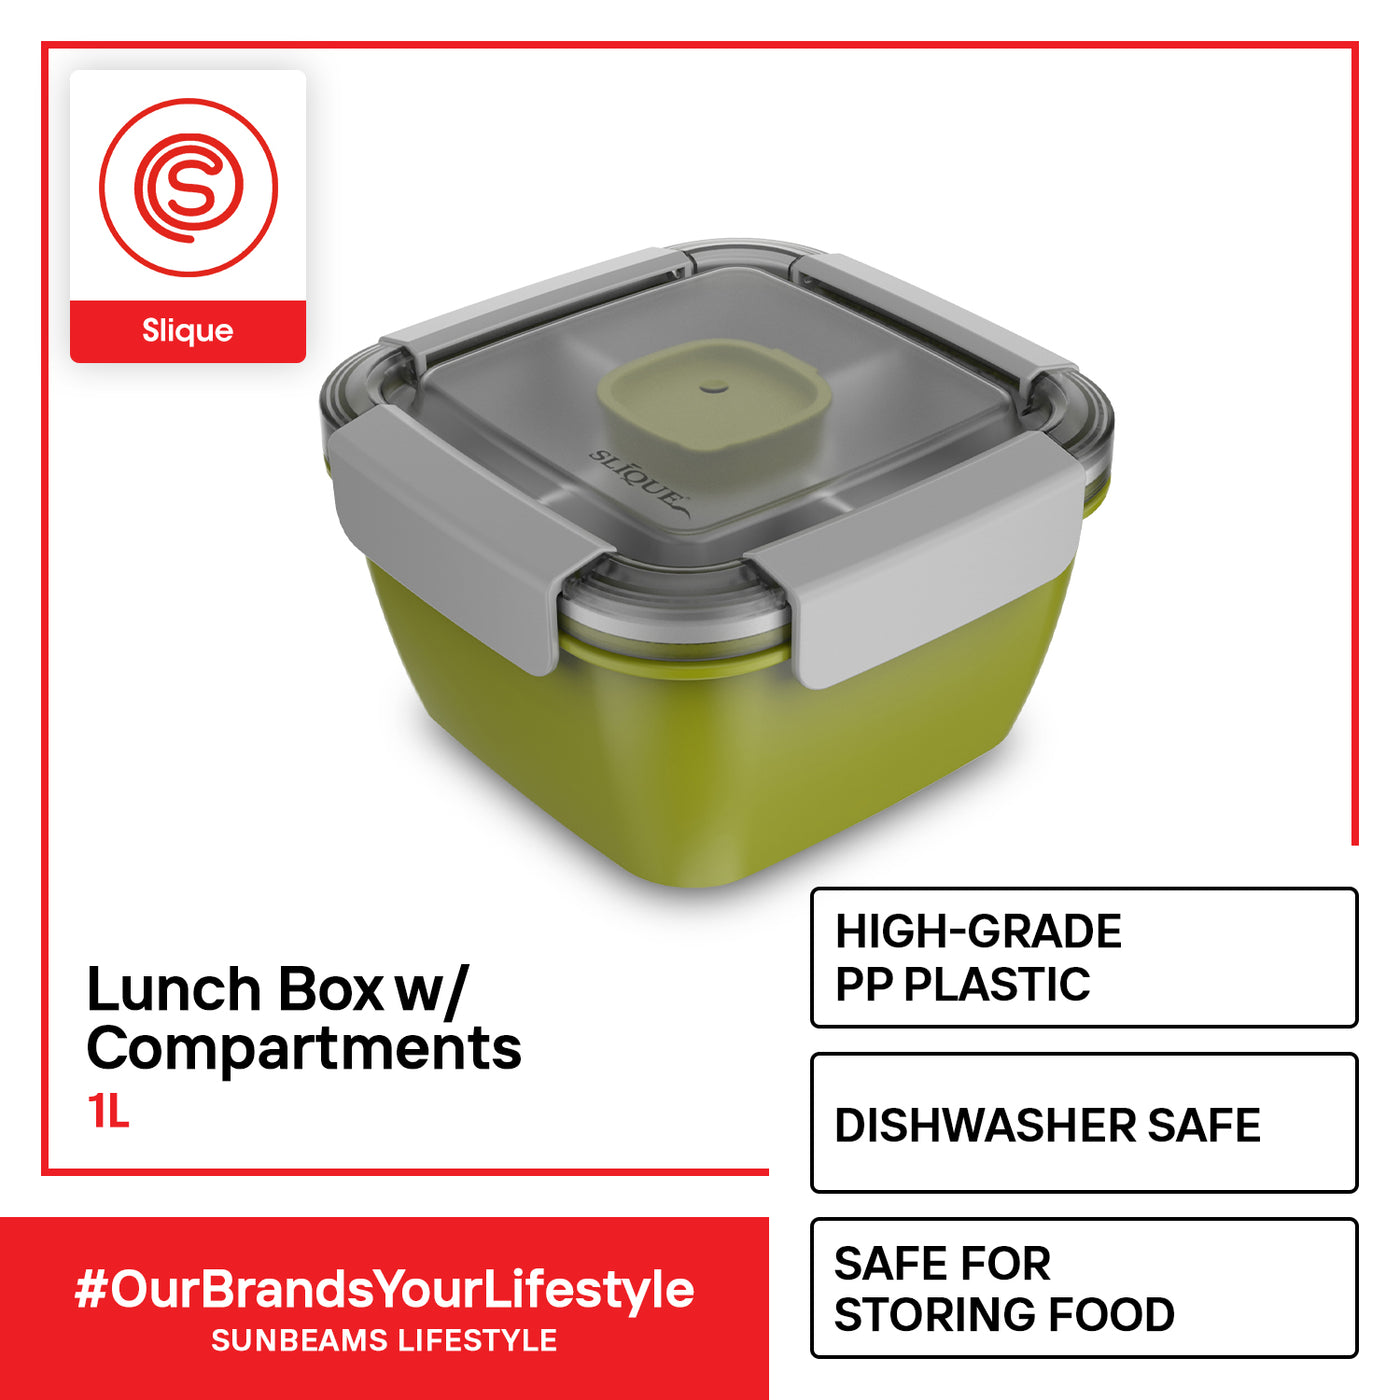 SLIQUE Premium Lunch Box w/ Compartments 1000ml1L BPA Free Airtight Microwave Safe Amazing Gift Idea For Any Occasion! (Green)